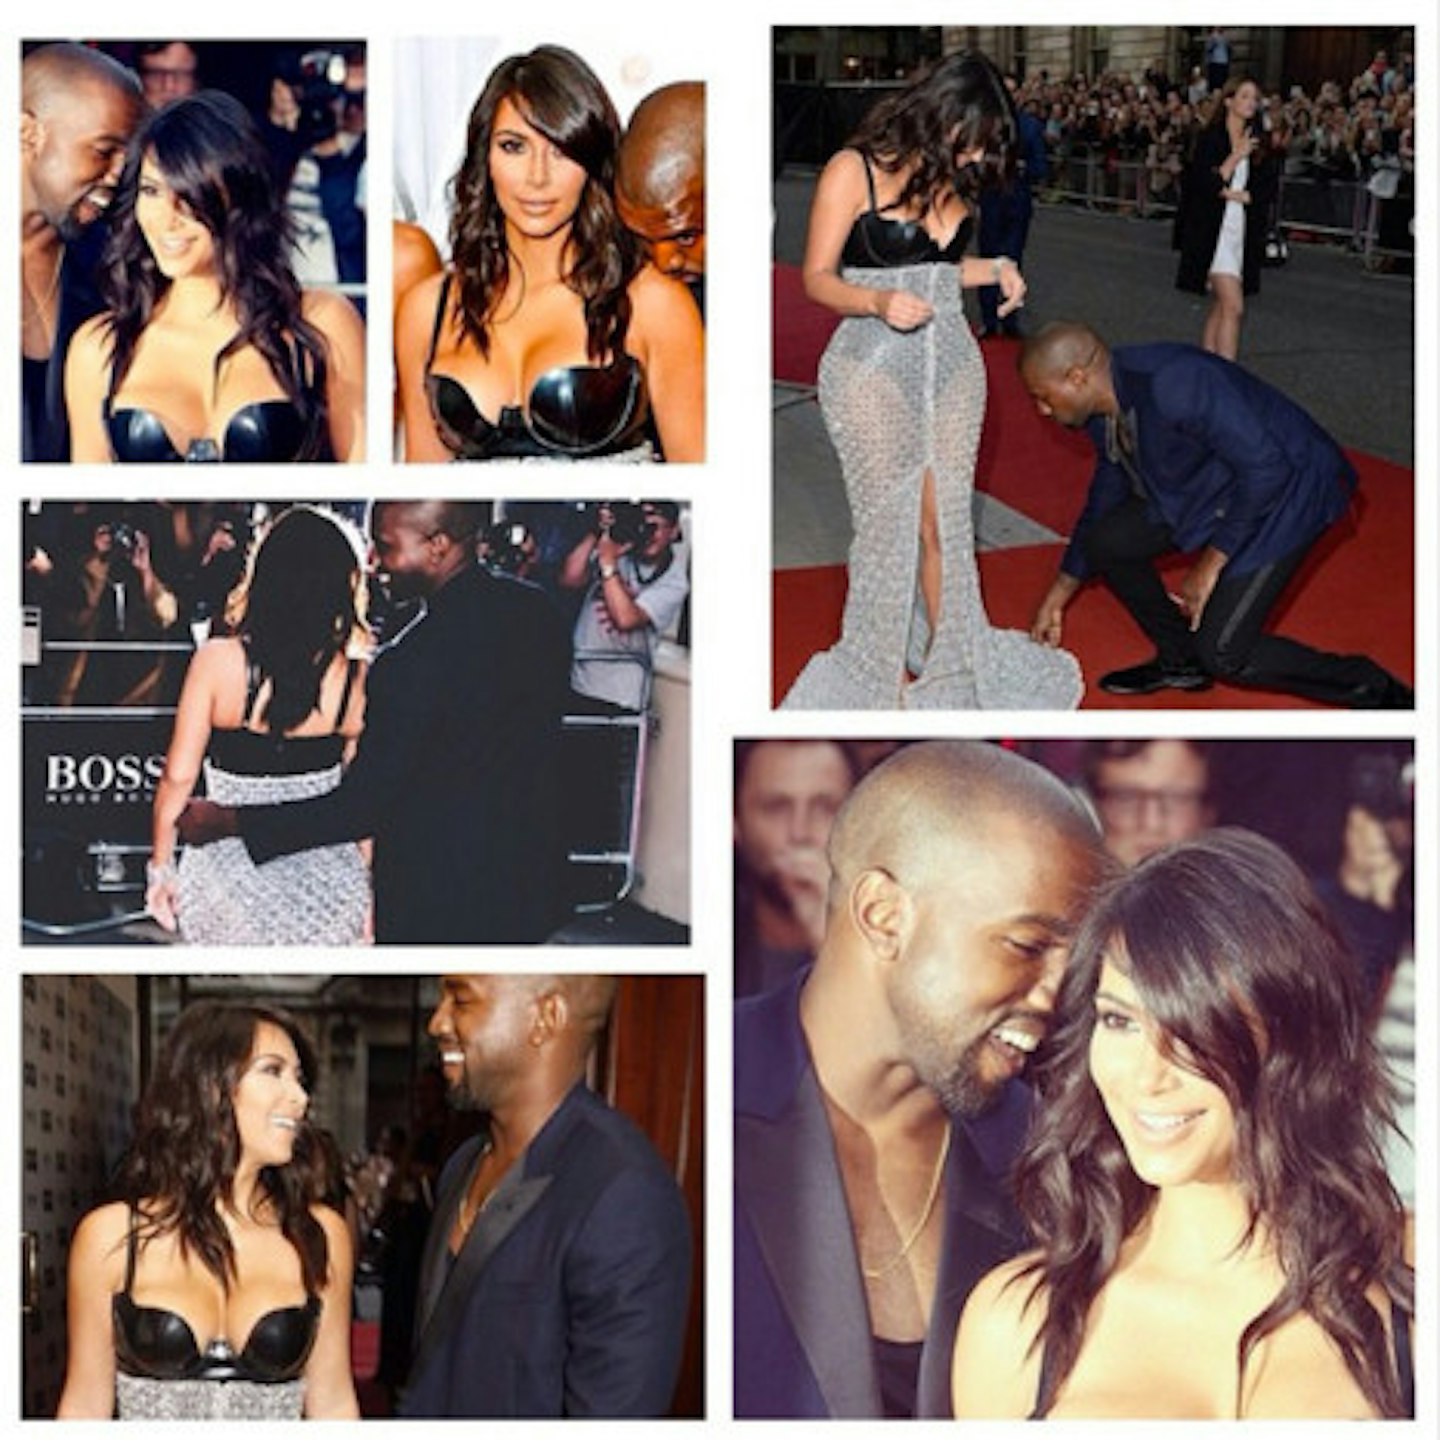 Khloe Kardashian shared this picture, writing 'I love the way he loves her #kimye'